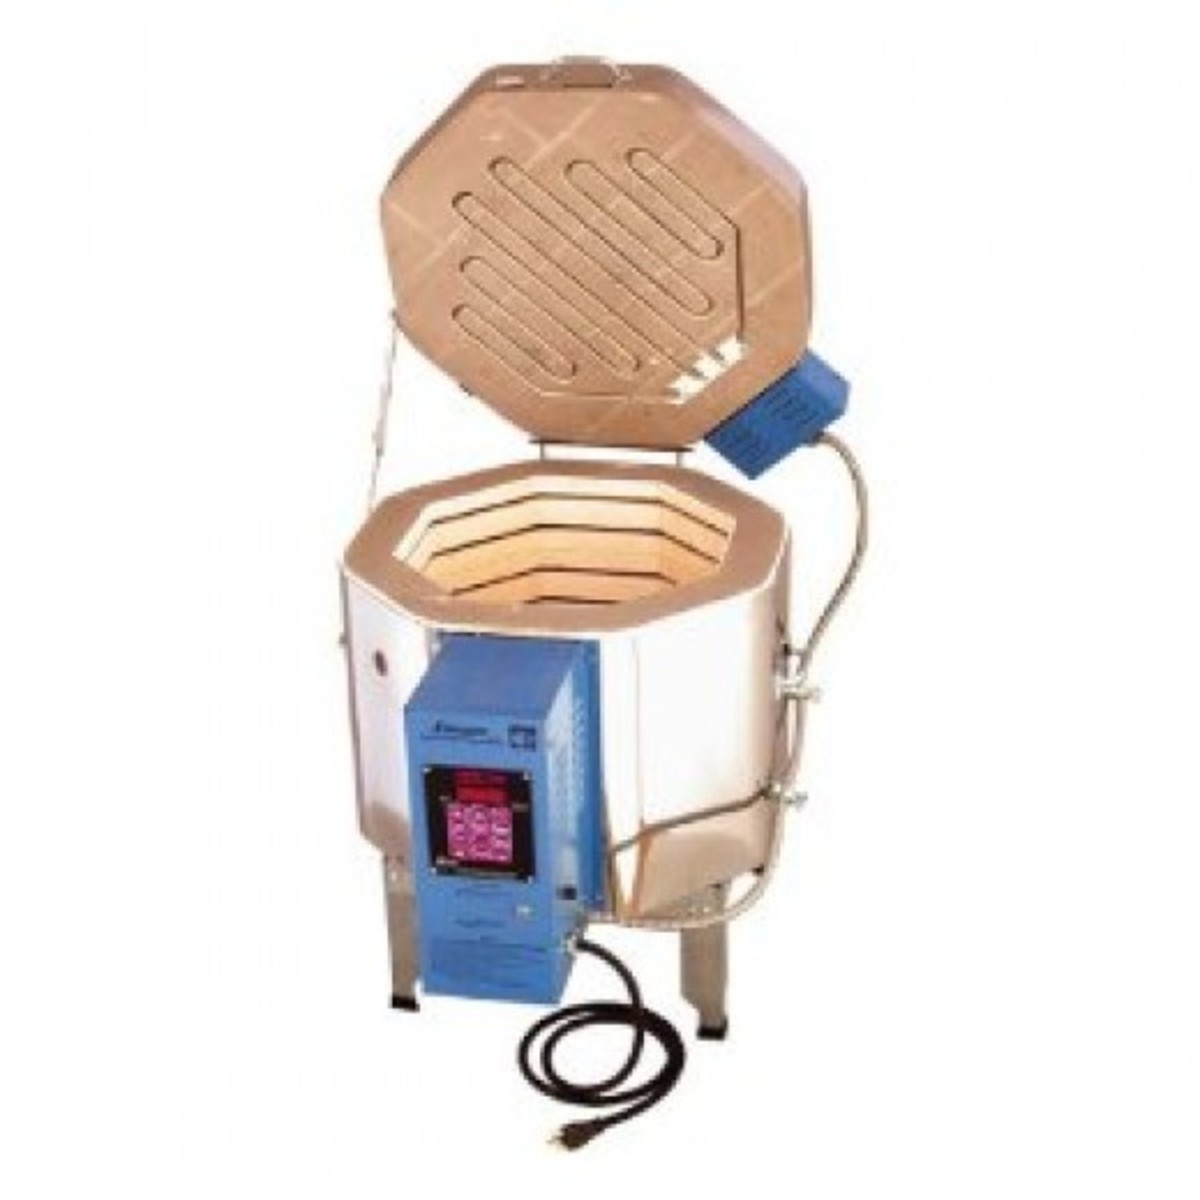 A small top loading kiln - ideal for a beginner in pottery and ceramic. Image Credit: Amazon.com